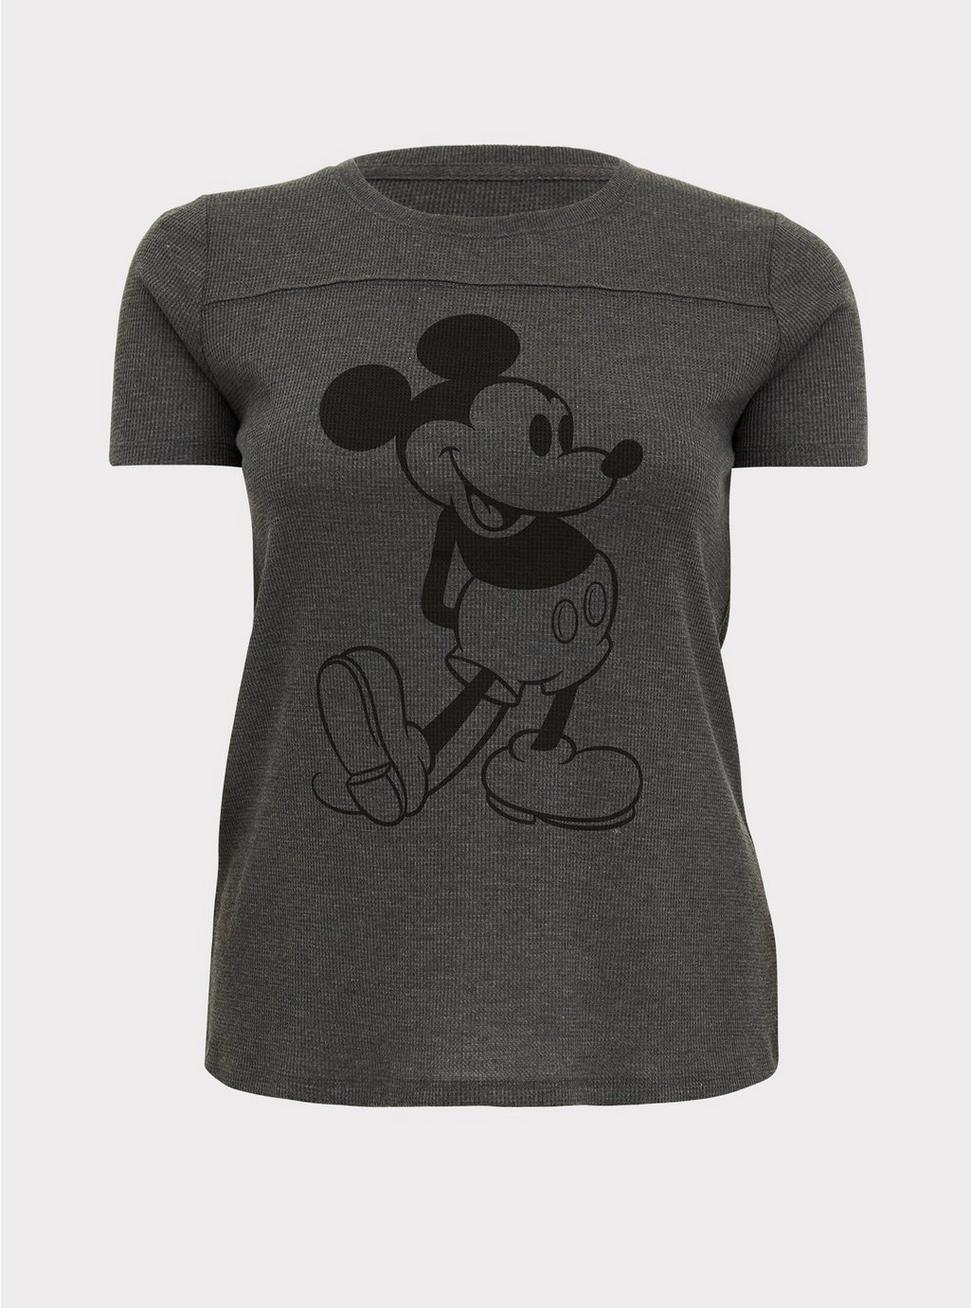 Plus Size - Disney Mickey Mouse Charcoal Grey Waffle Knit Top - Torrid